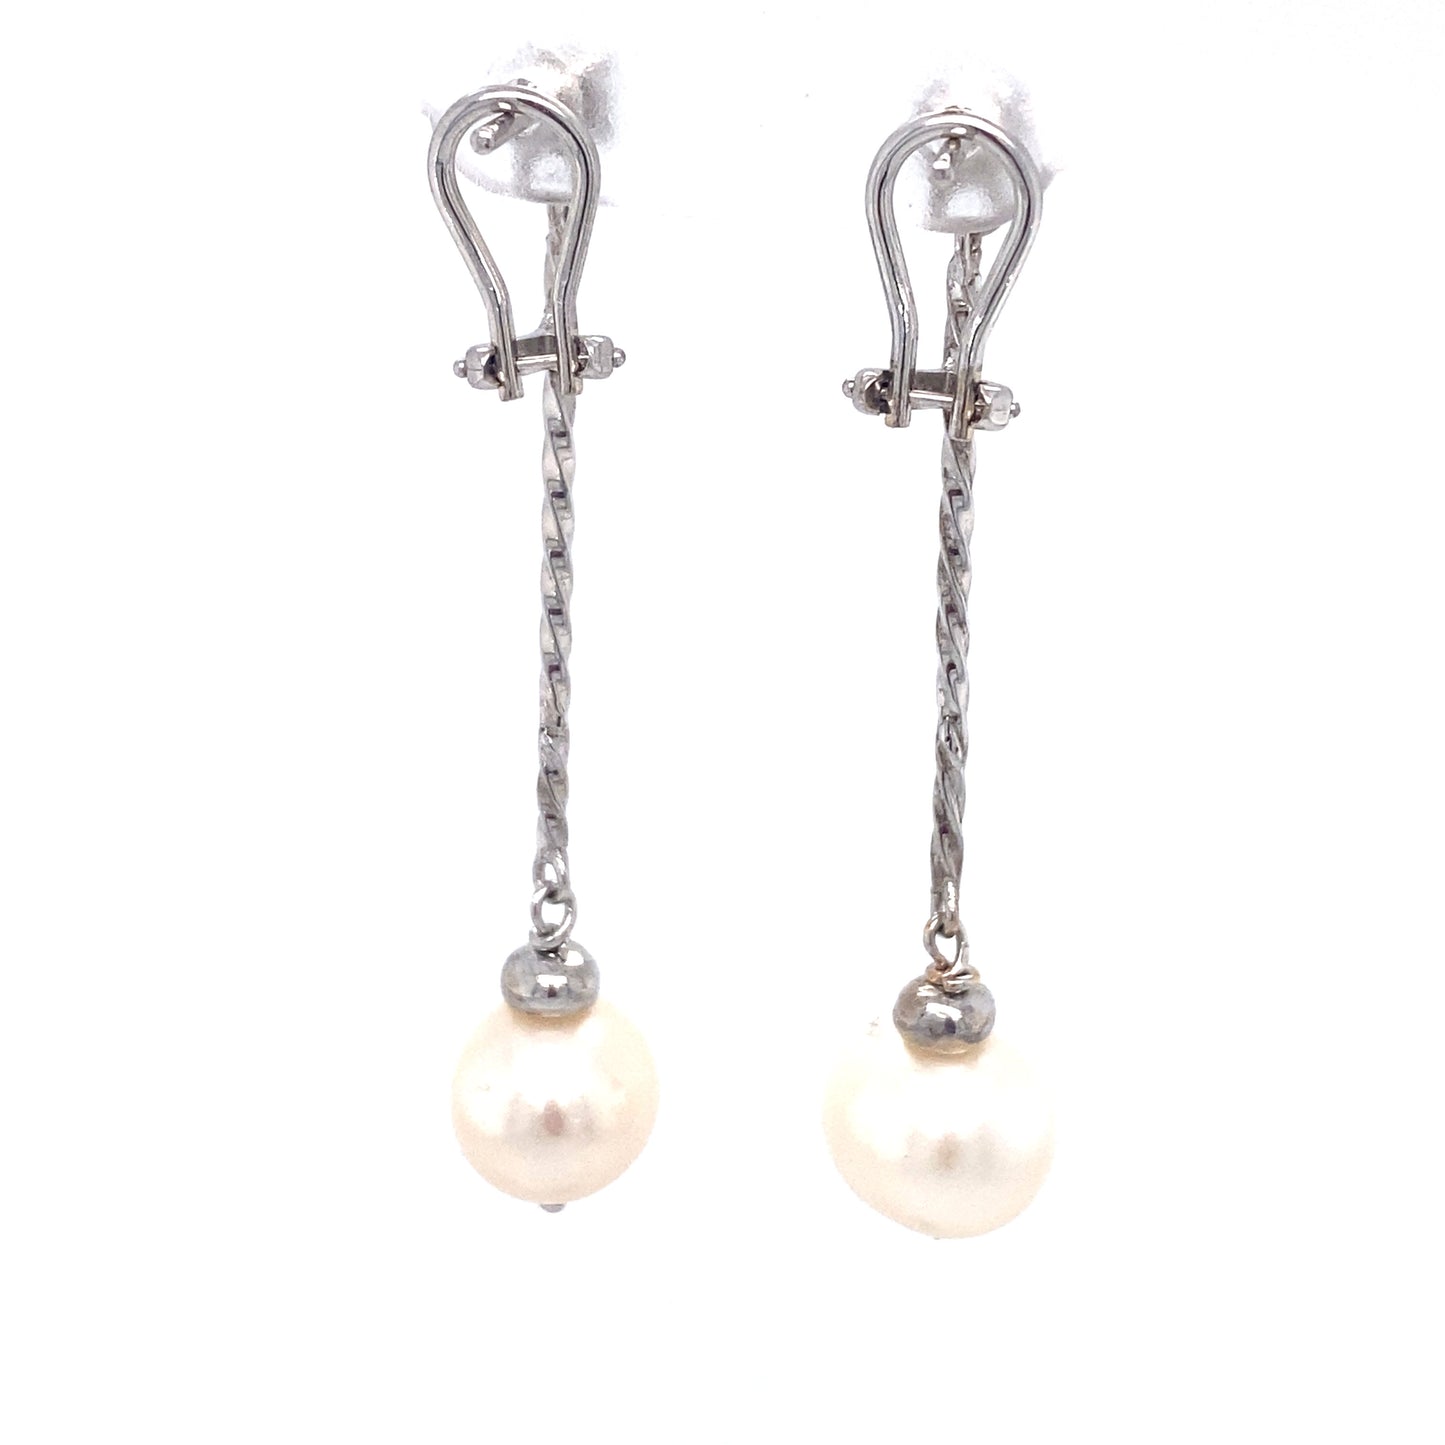 Circa 1980s 0.50 Carat Diamond Drop Earrings with Pearls in 14K White Gold